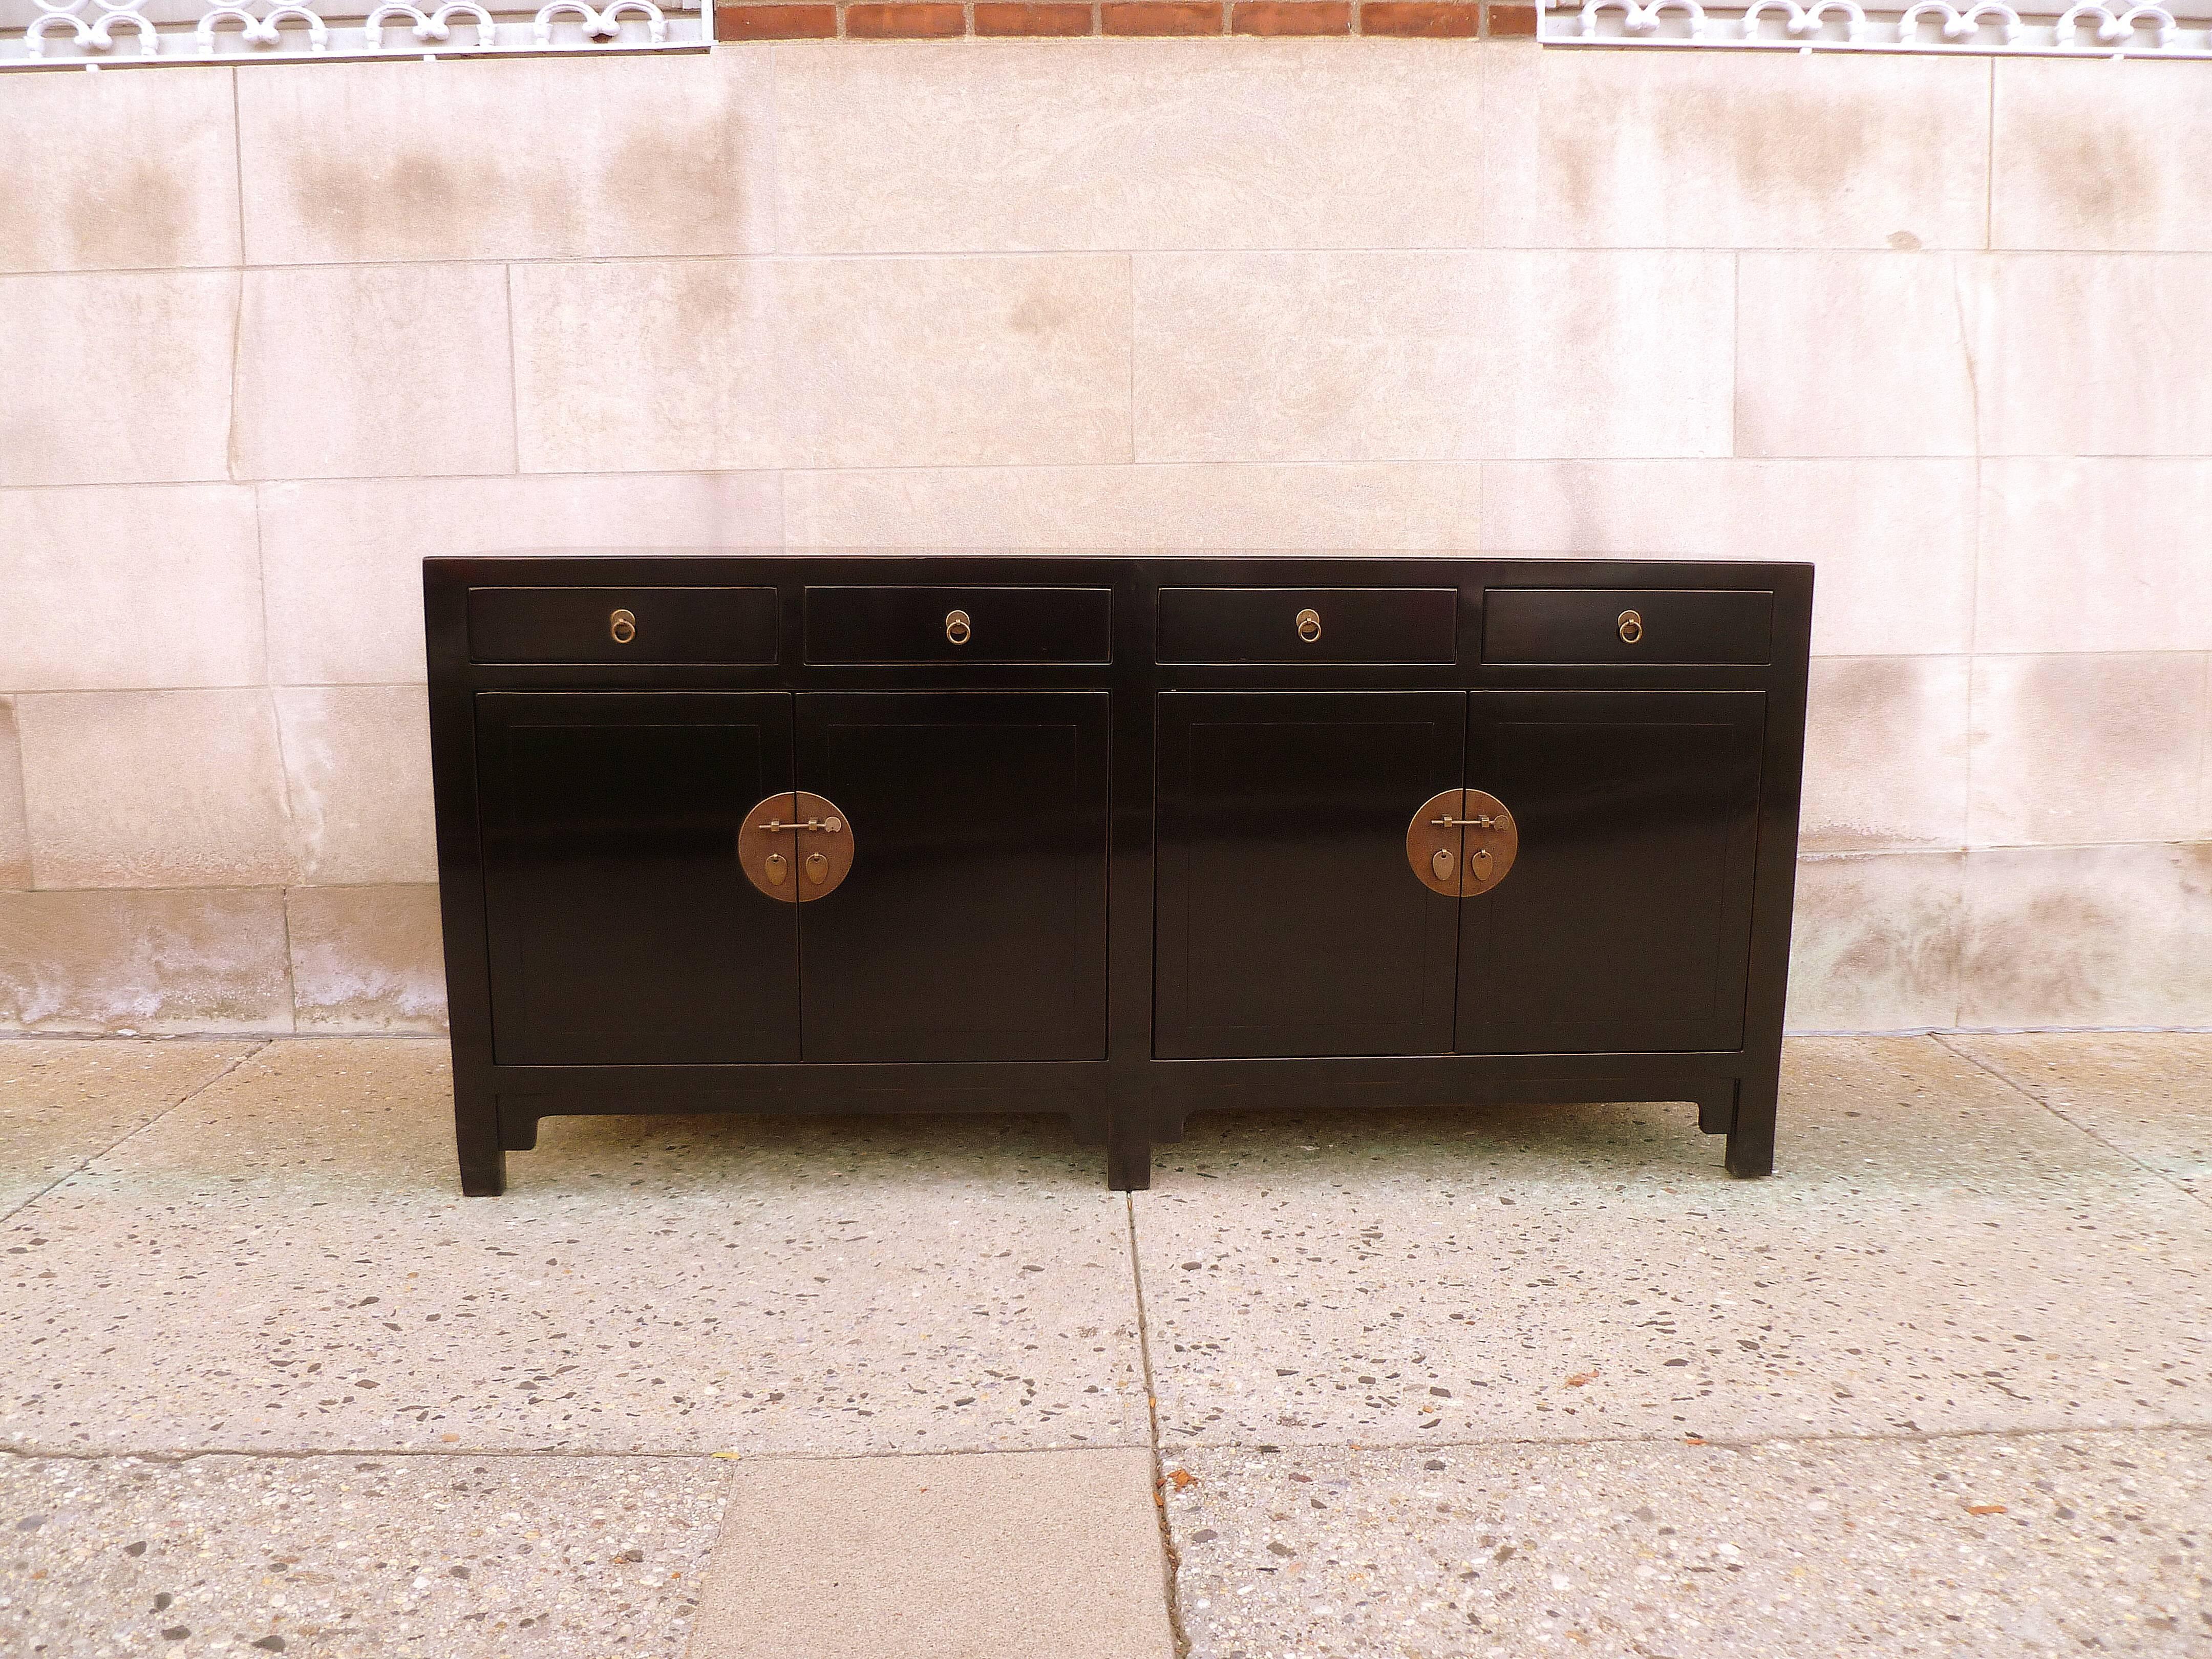 A refined and elegant black lacquer sideboard with four drawers on top of two pairs of doors, brass fitting, beautiful color, form and lines.